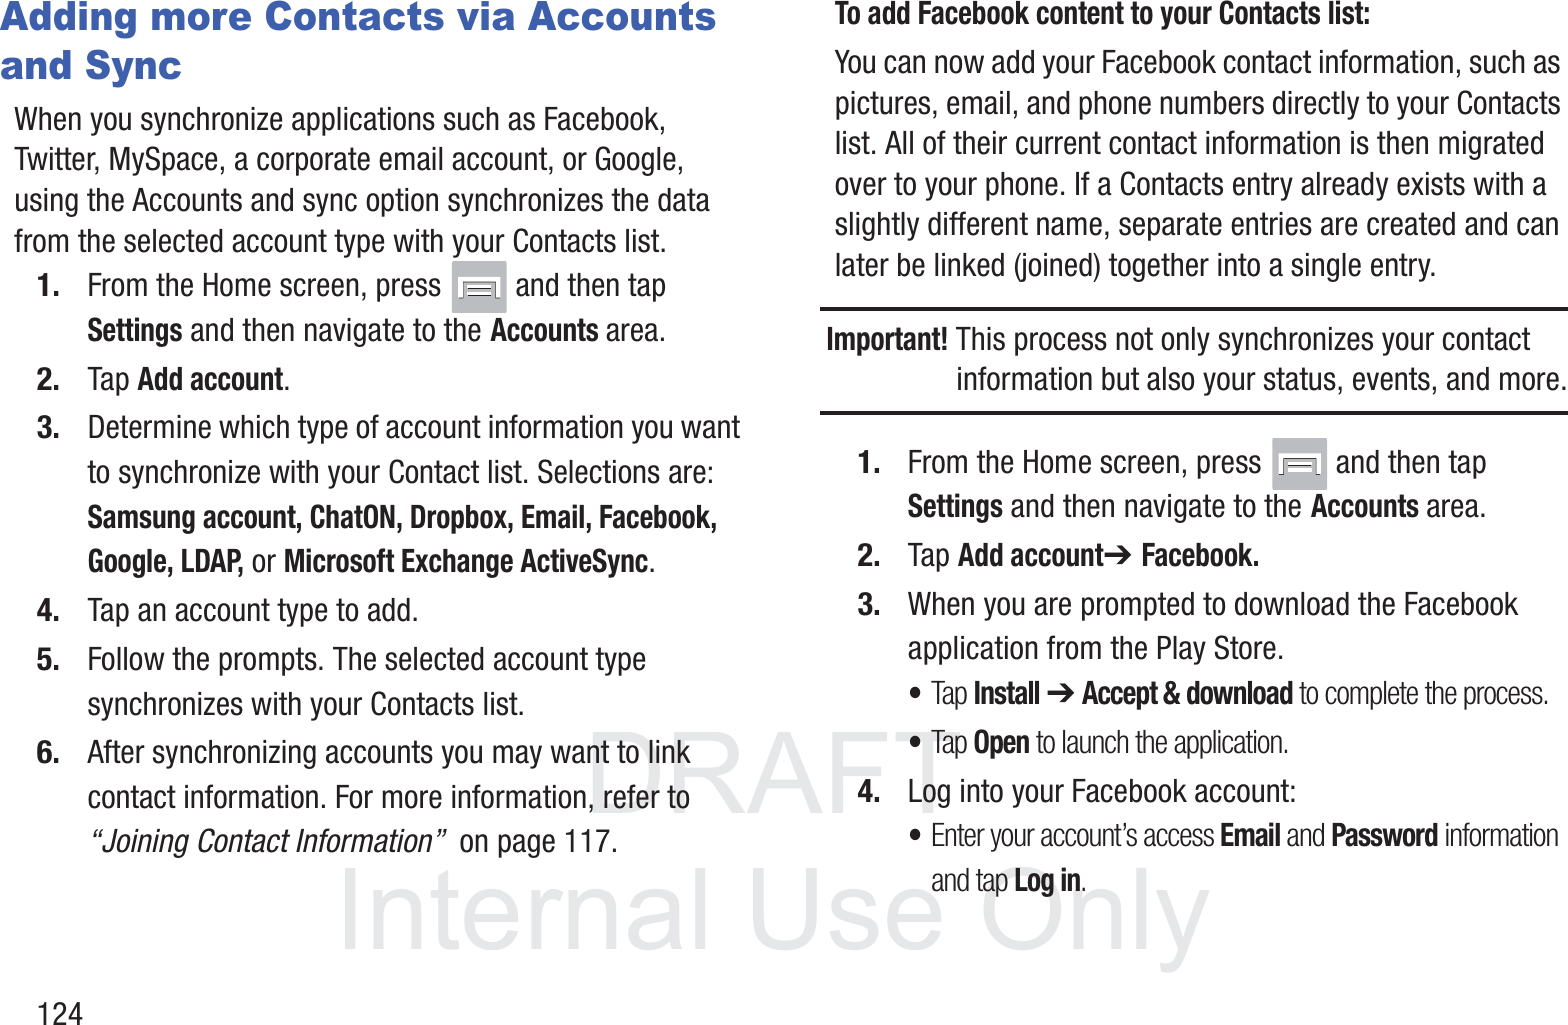 DRAFT InternalUse Only124Adding more Contacts via Accounts and SyncWhen you synchronize applications such as Facebook, Twitter, MySpace, a corporate email account, or Google, using the Accounts and sync option synchronizes the data from the selected account type with your Contacts list.1. From the Home screen, press   and then tap Settings and then navigate to the Accounts area.2. Tap Add account.3. Determine which type of account information you want to synchronize with your Contact list. Selections are: Samsung account, ChatON, Dropbox, Email, Facebook, Google, LDAP, or Microsoft Exchange ActiveSync.4. Tap an account type to add.5. Follow the prompts. The selected account type synchronizes with your Contacts list.6. After synchronizing accounts you may want to link contact information. For more information, refer to “Joining Contact Information”  on page 117.To add Facebook content to your Contacts list:You can now add your Facebook contact information, such as pictures, email, and phone numbers directly to your Contacts list. All of their current contact information is then migrated over to your phone. If a Contacts entry already exists with a slightly different name, separate entries are created and can later be linked (joined) together into a single entry.Important! This process not only synchronizes your contact information but also your status, events, and more.1. From the Home screen, press   and then tap Settings and then navigate to the Accounts area.2. Tap Add account➔ Facebook.3. When you are prompted to download the Facebook application from the Play Store. •Tap Install ➔ Accept &amp; download to complete the process.•Tap Open to launch the application.4. Log into your Facebook account: •Enter your account’s access Email and Password information and tap Log in.